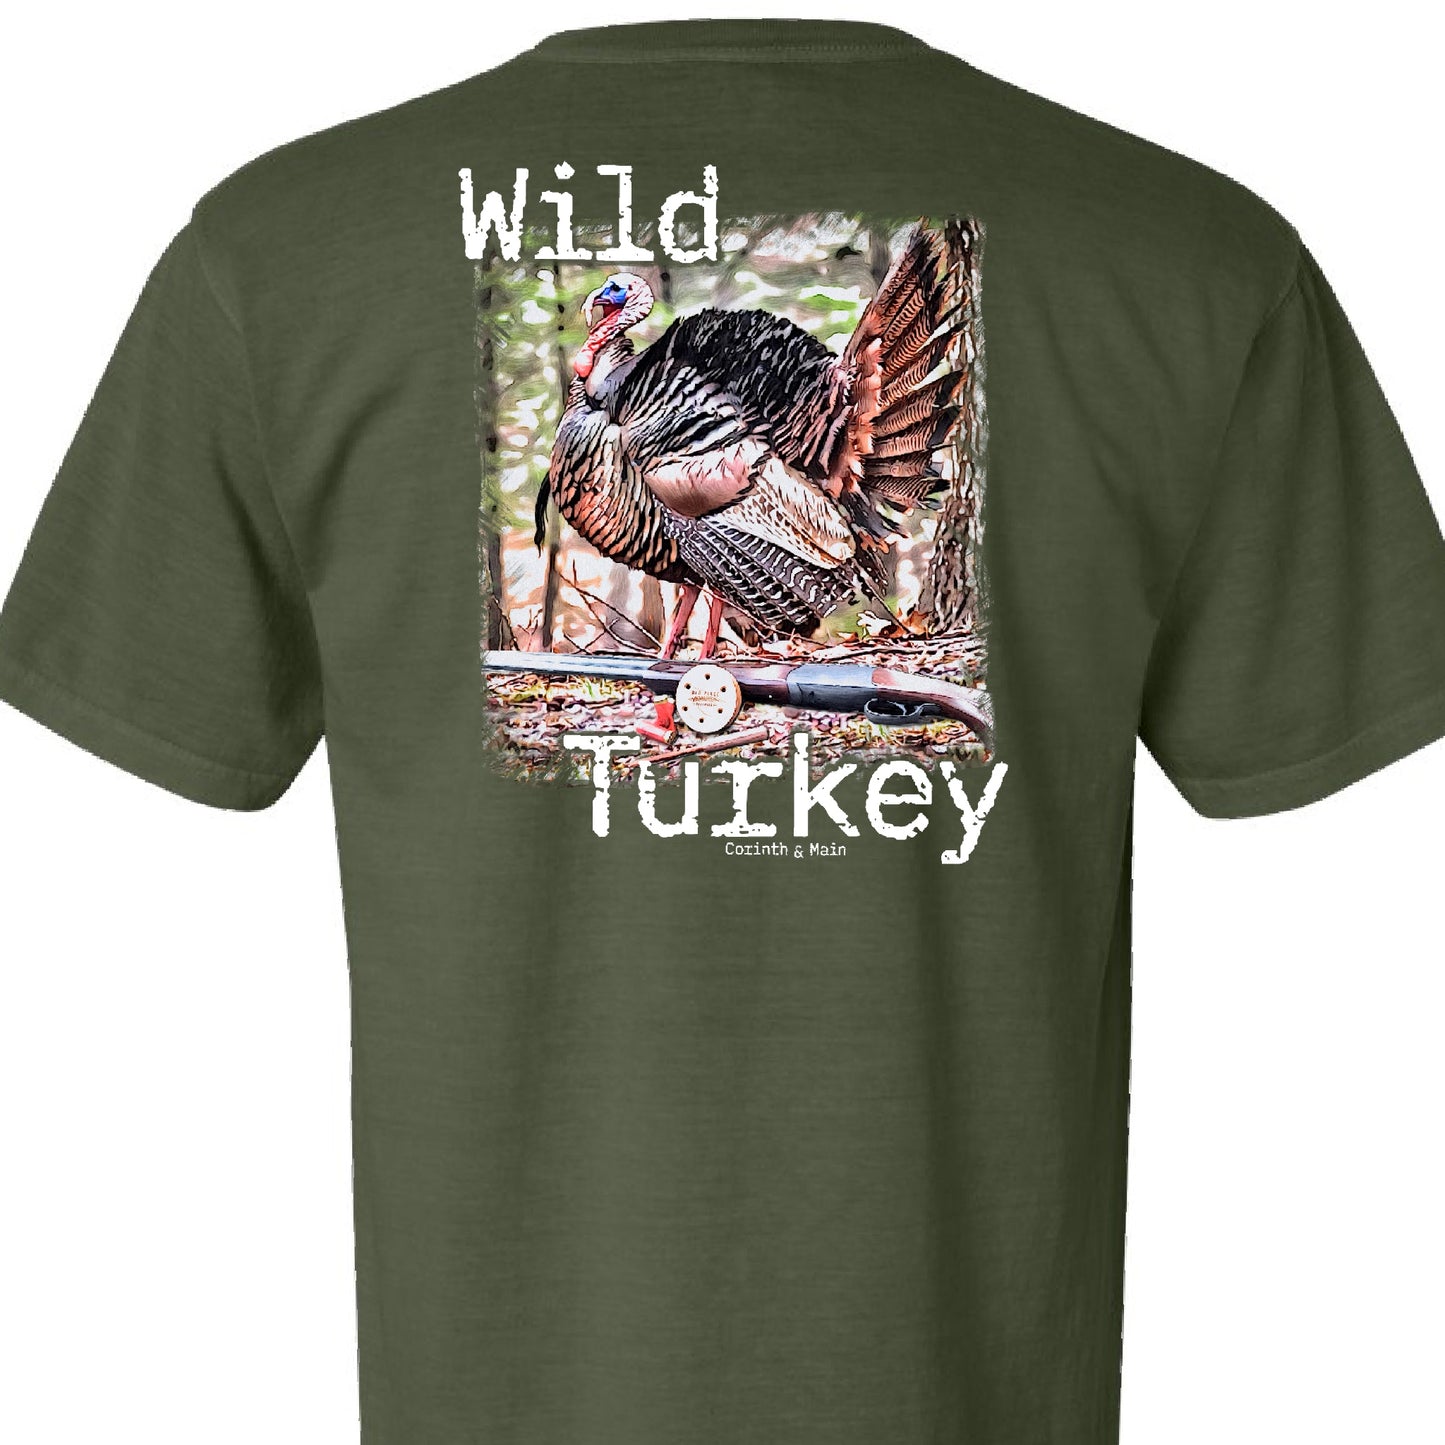 Wild Turkey with Old Place Outdoors